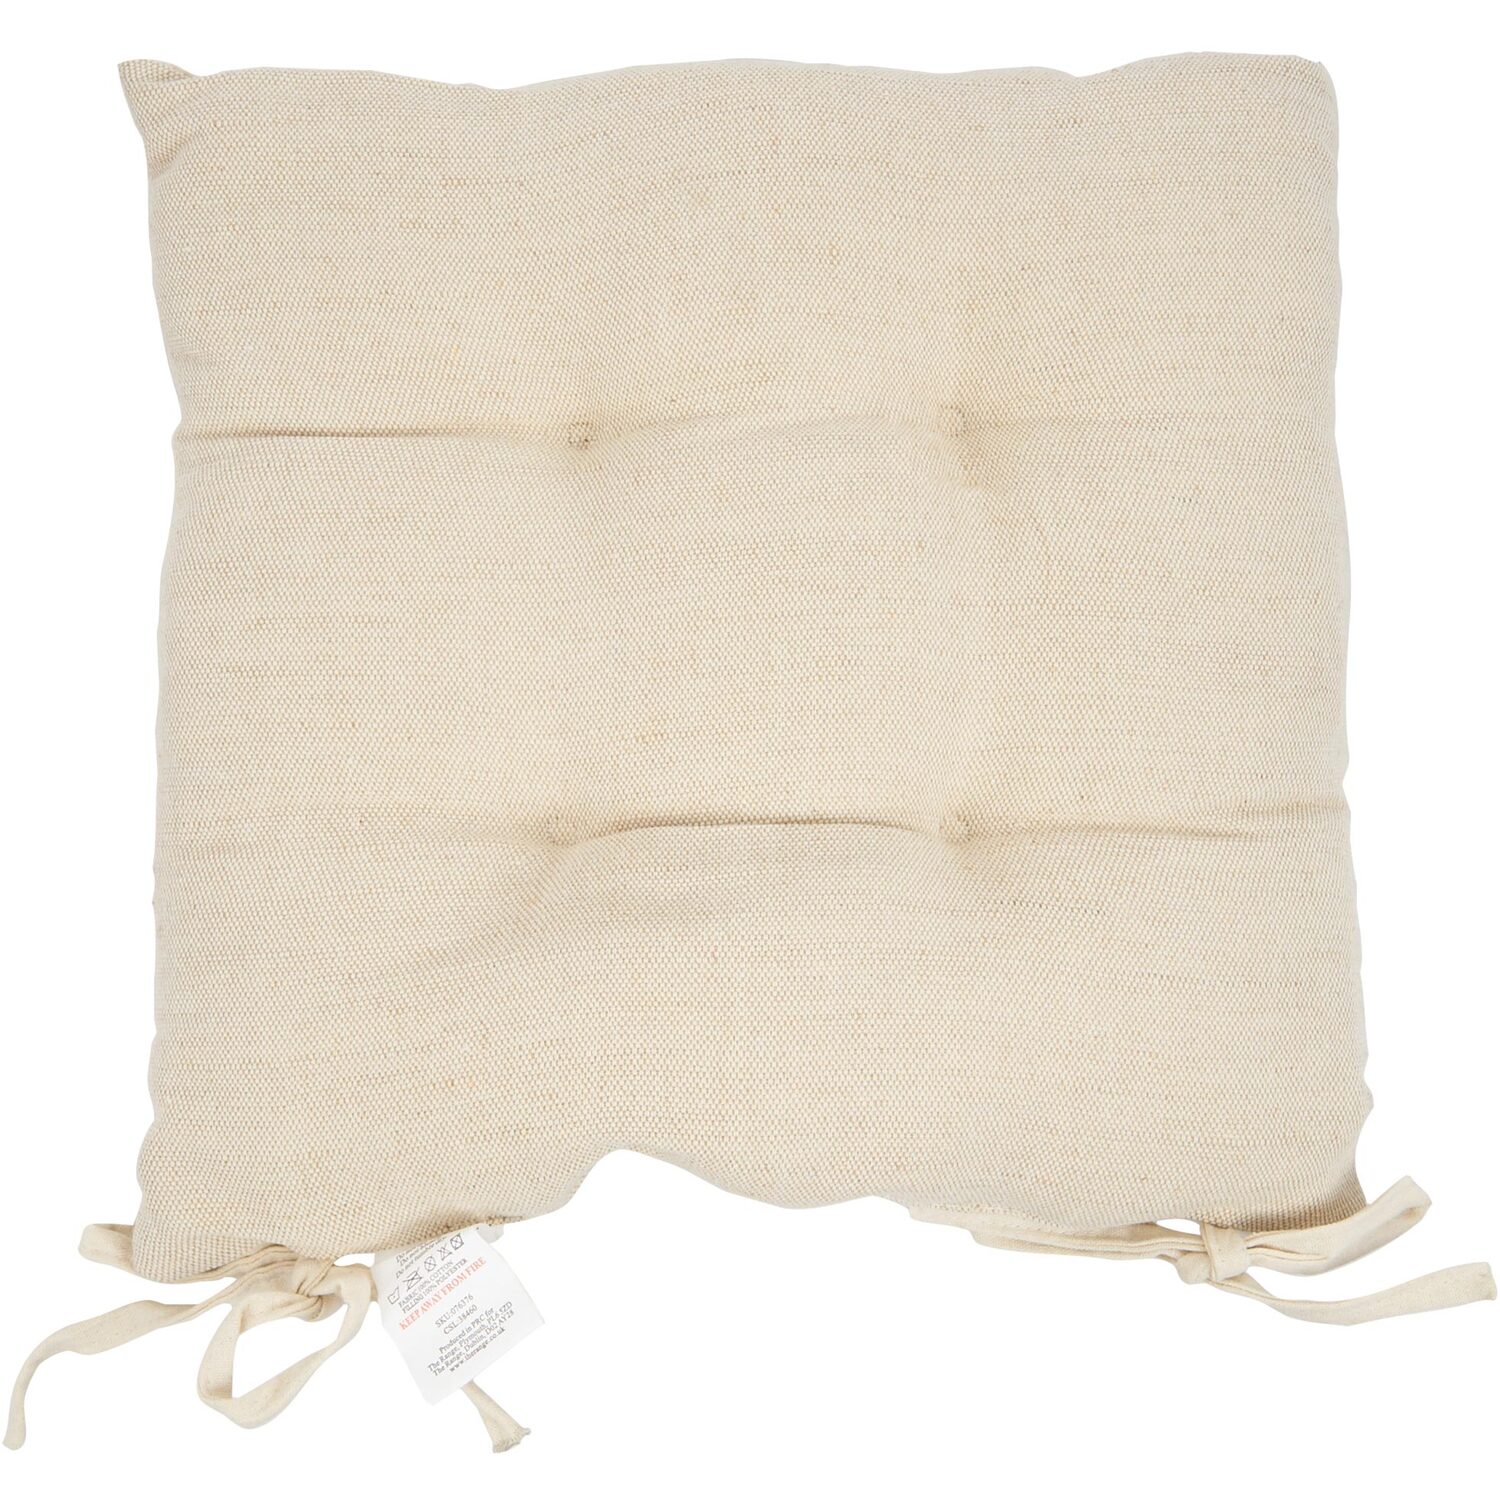 Natural Double Sided Cotton Seat Pad 40 x 40cm Image 2